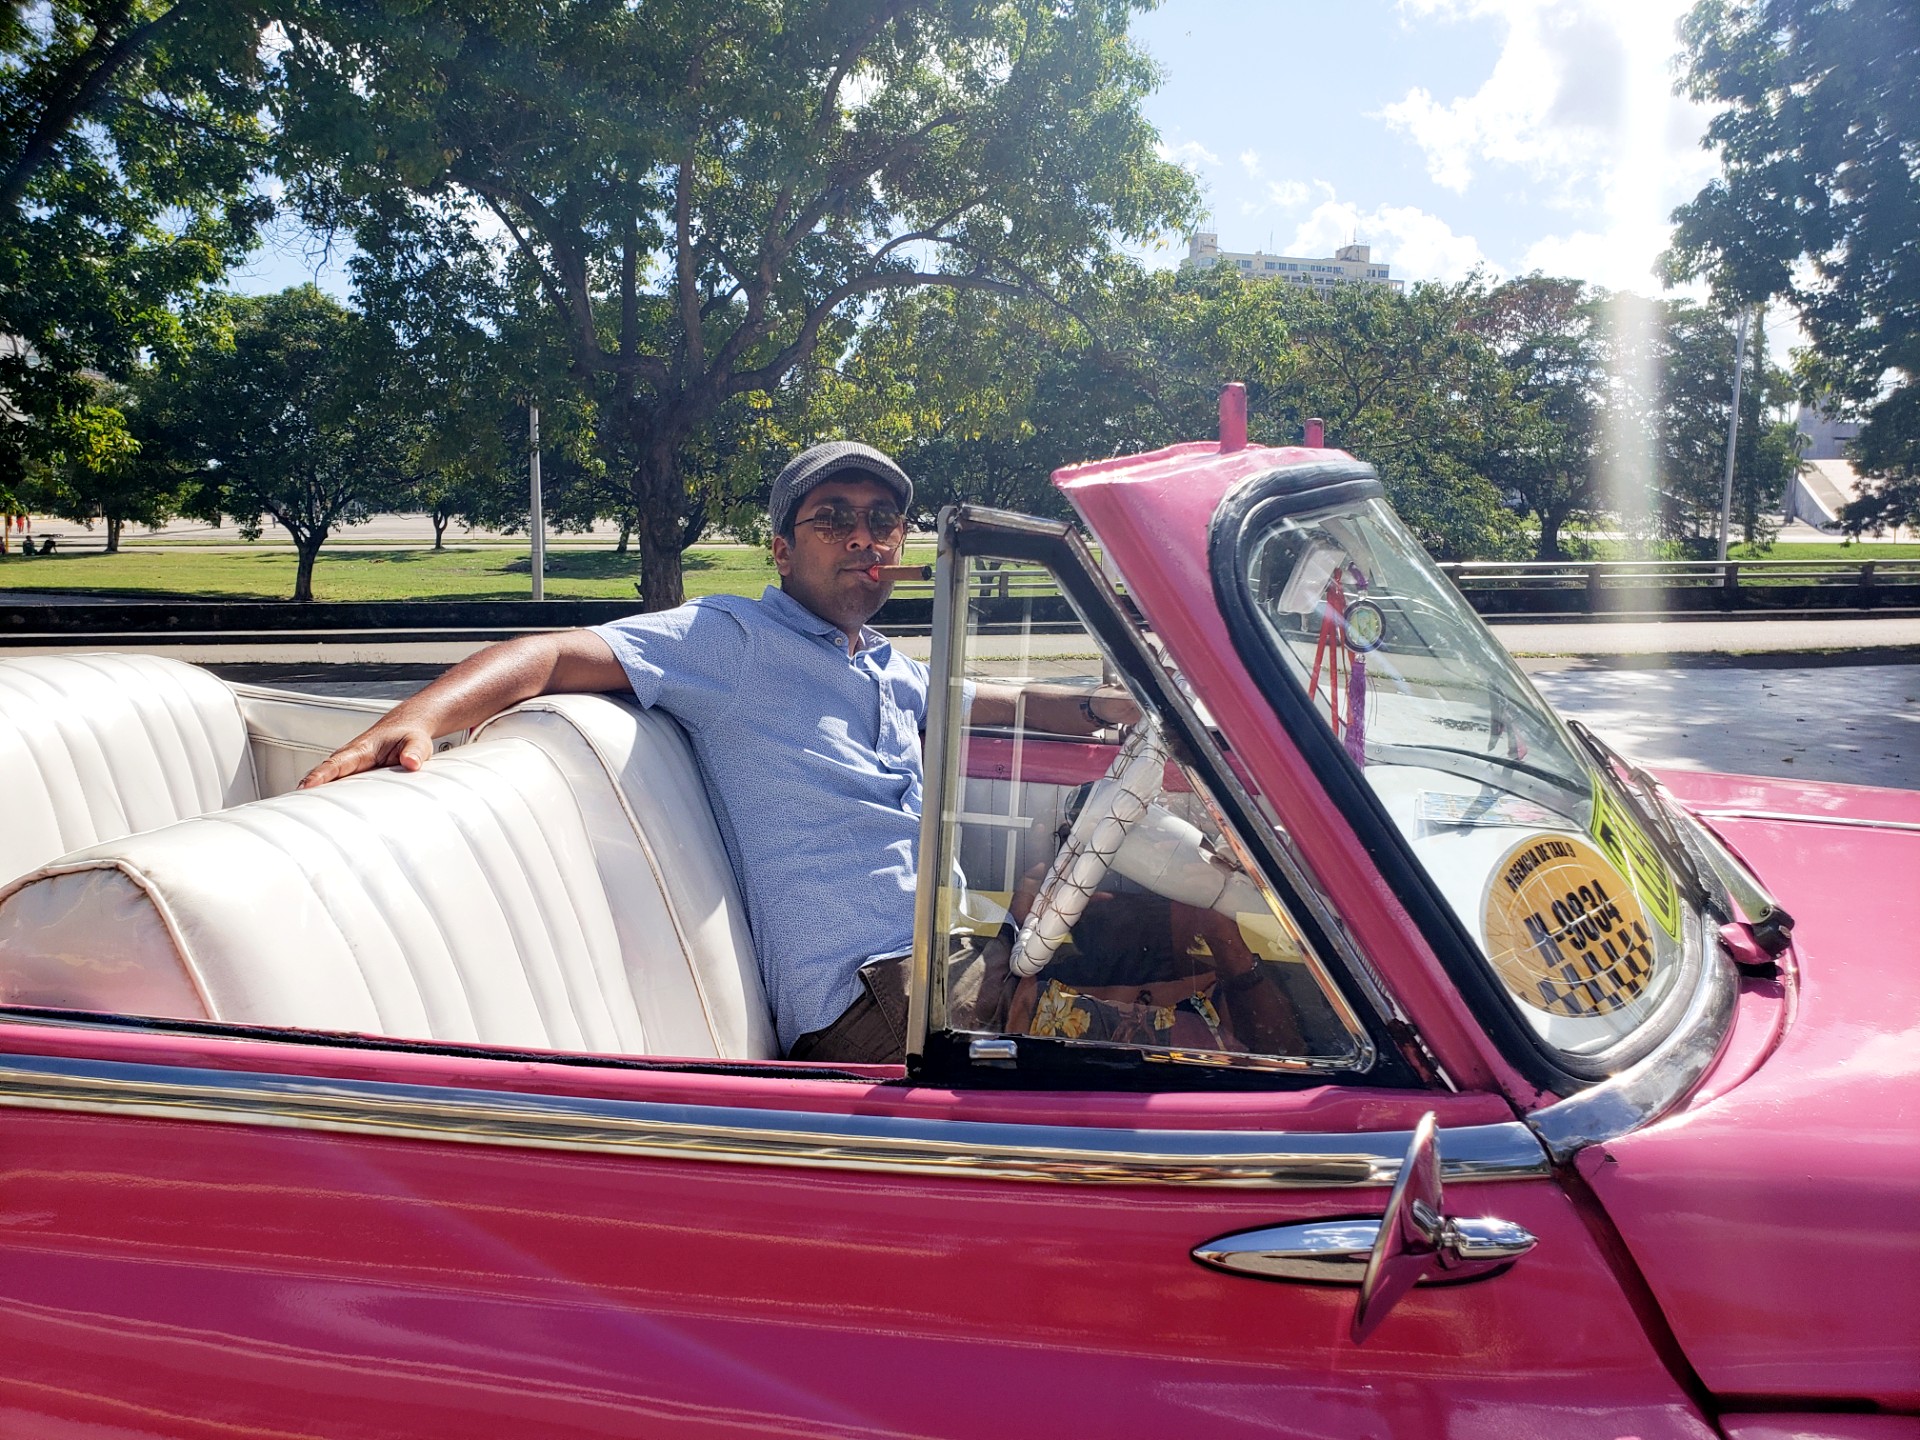 A man wearing blue shirt and golf cap, smoking a cigar, seated in the driver's seat of a pink vintage car. Riding a vintage car in Havana is a must do activity on your Cuba itinerary.